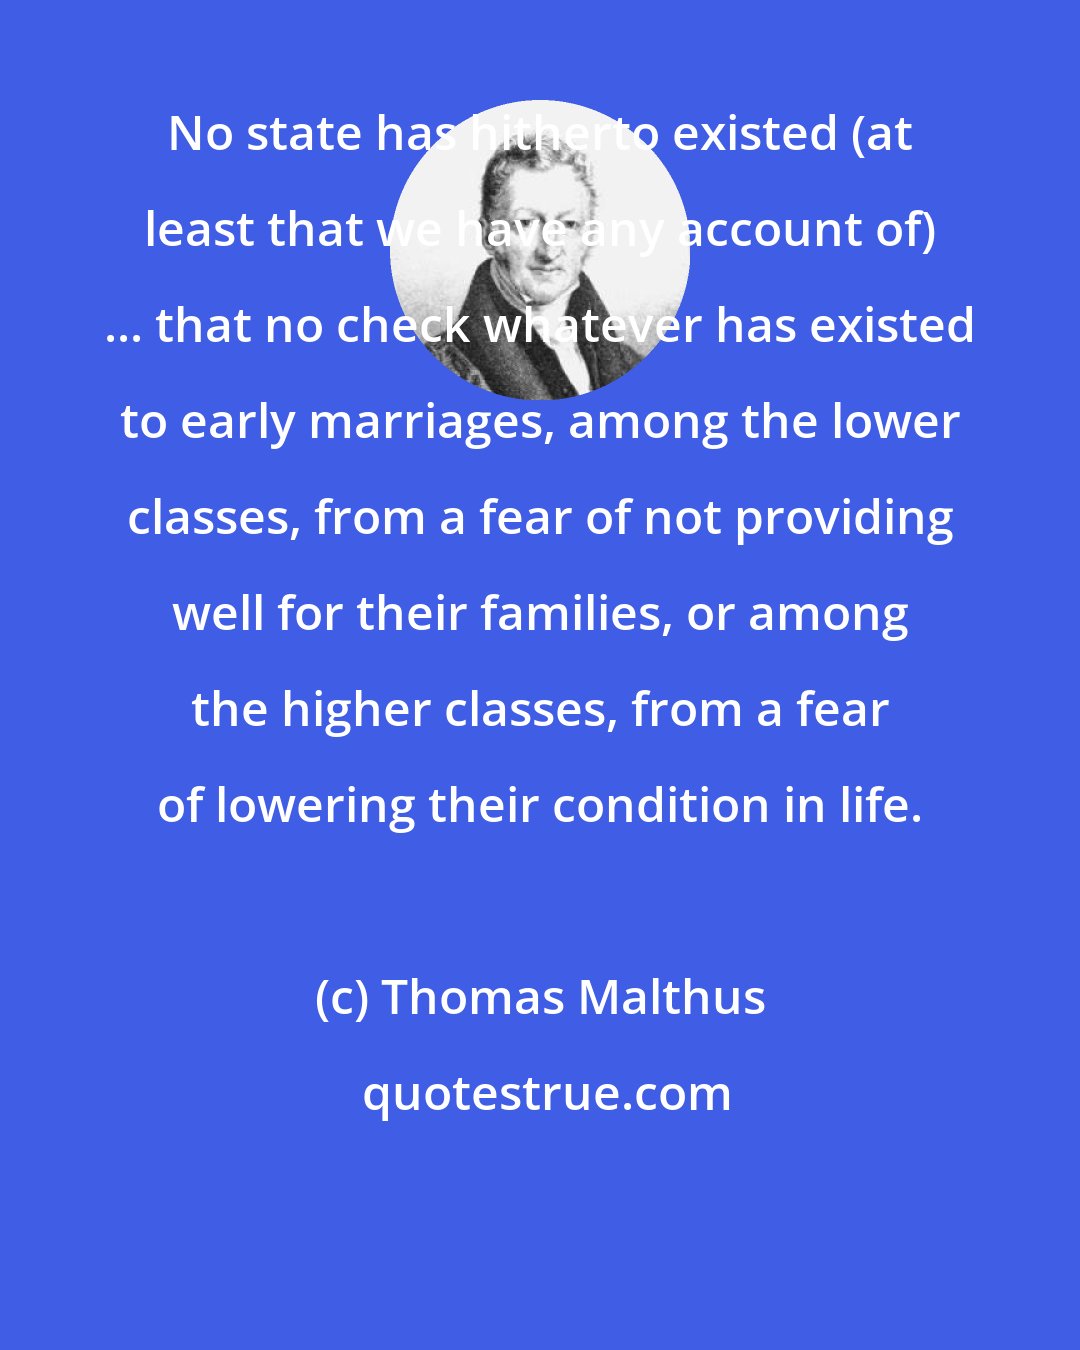 Thomas Malthus: No state has hitherto existed (at least that we have any account of) ... that no check whatever has existed to early marriages, among the lower classes, from a fear of not providing well for their families, or among the higher classes, from a fear of lowering their condition in life.